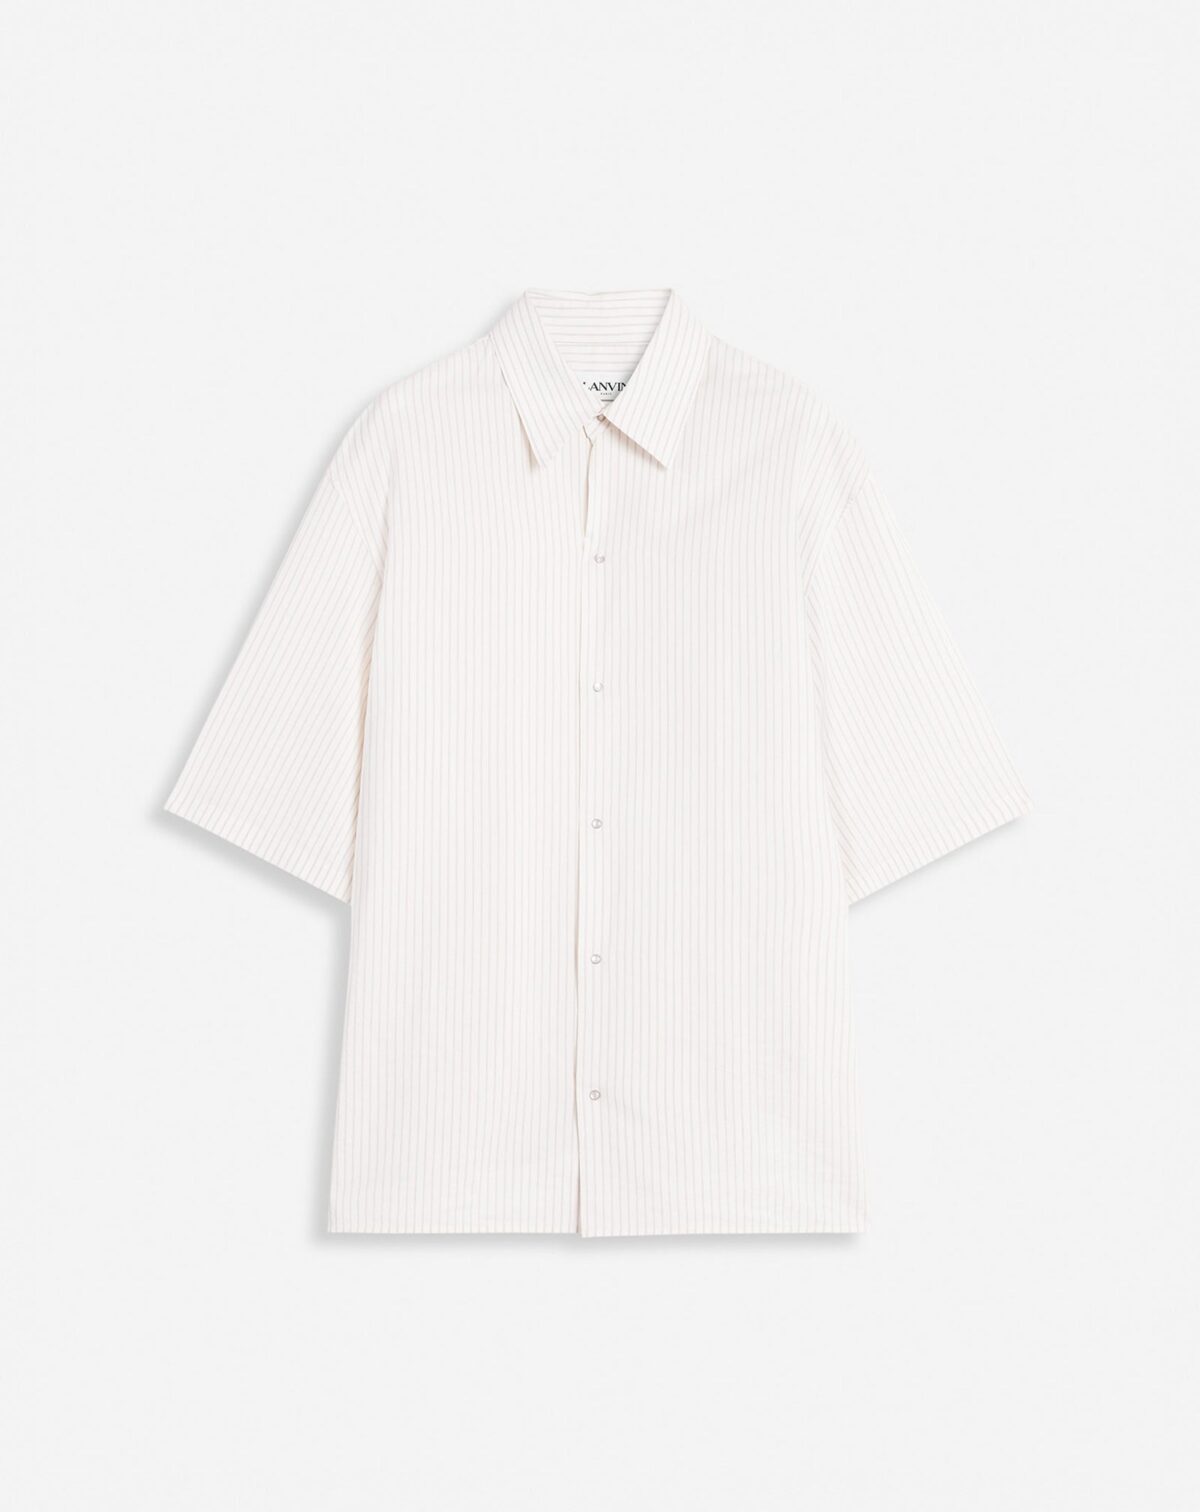 LOOSE-FITTING SHIRT WITH GUSSET